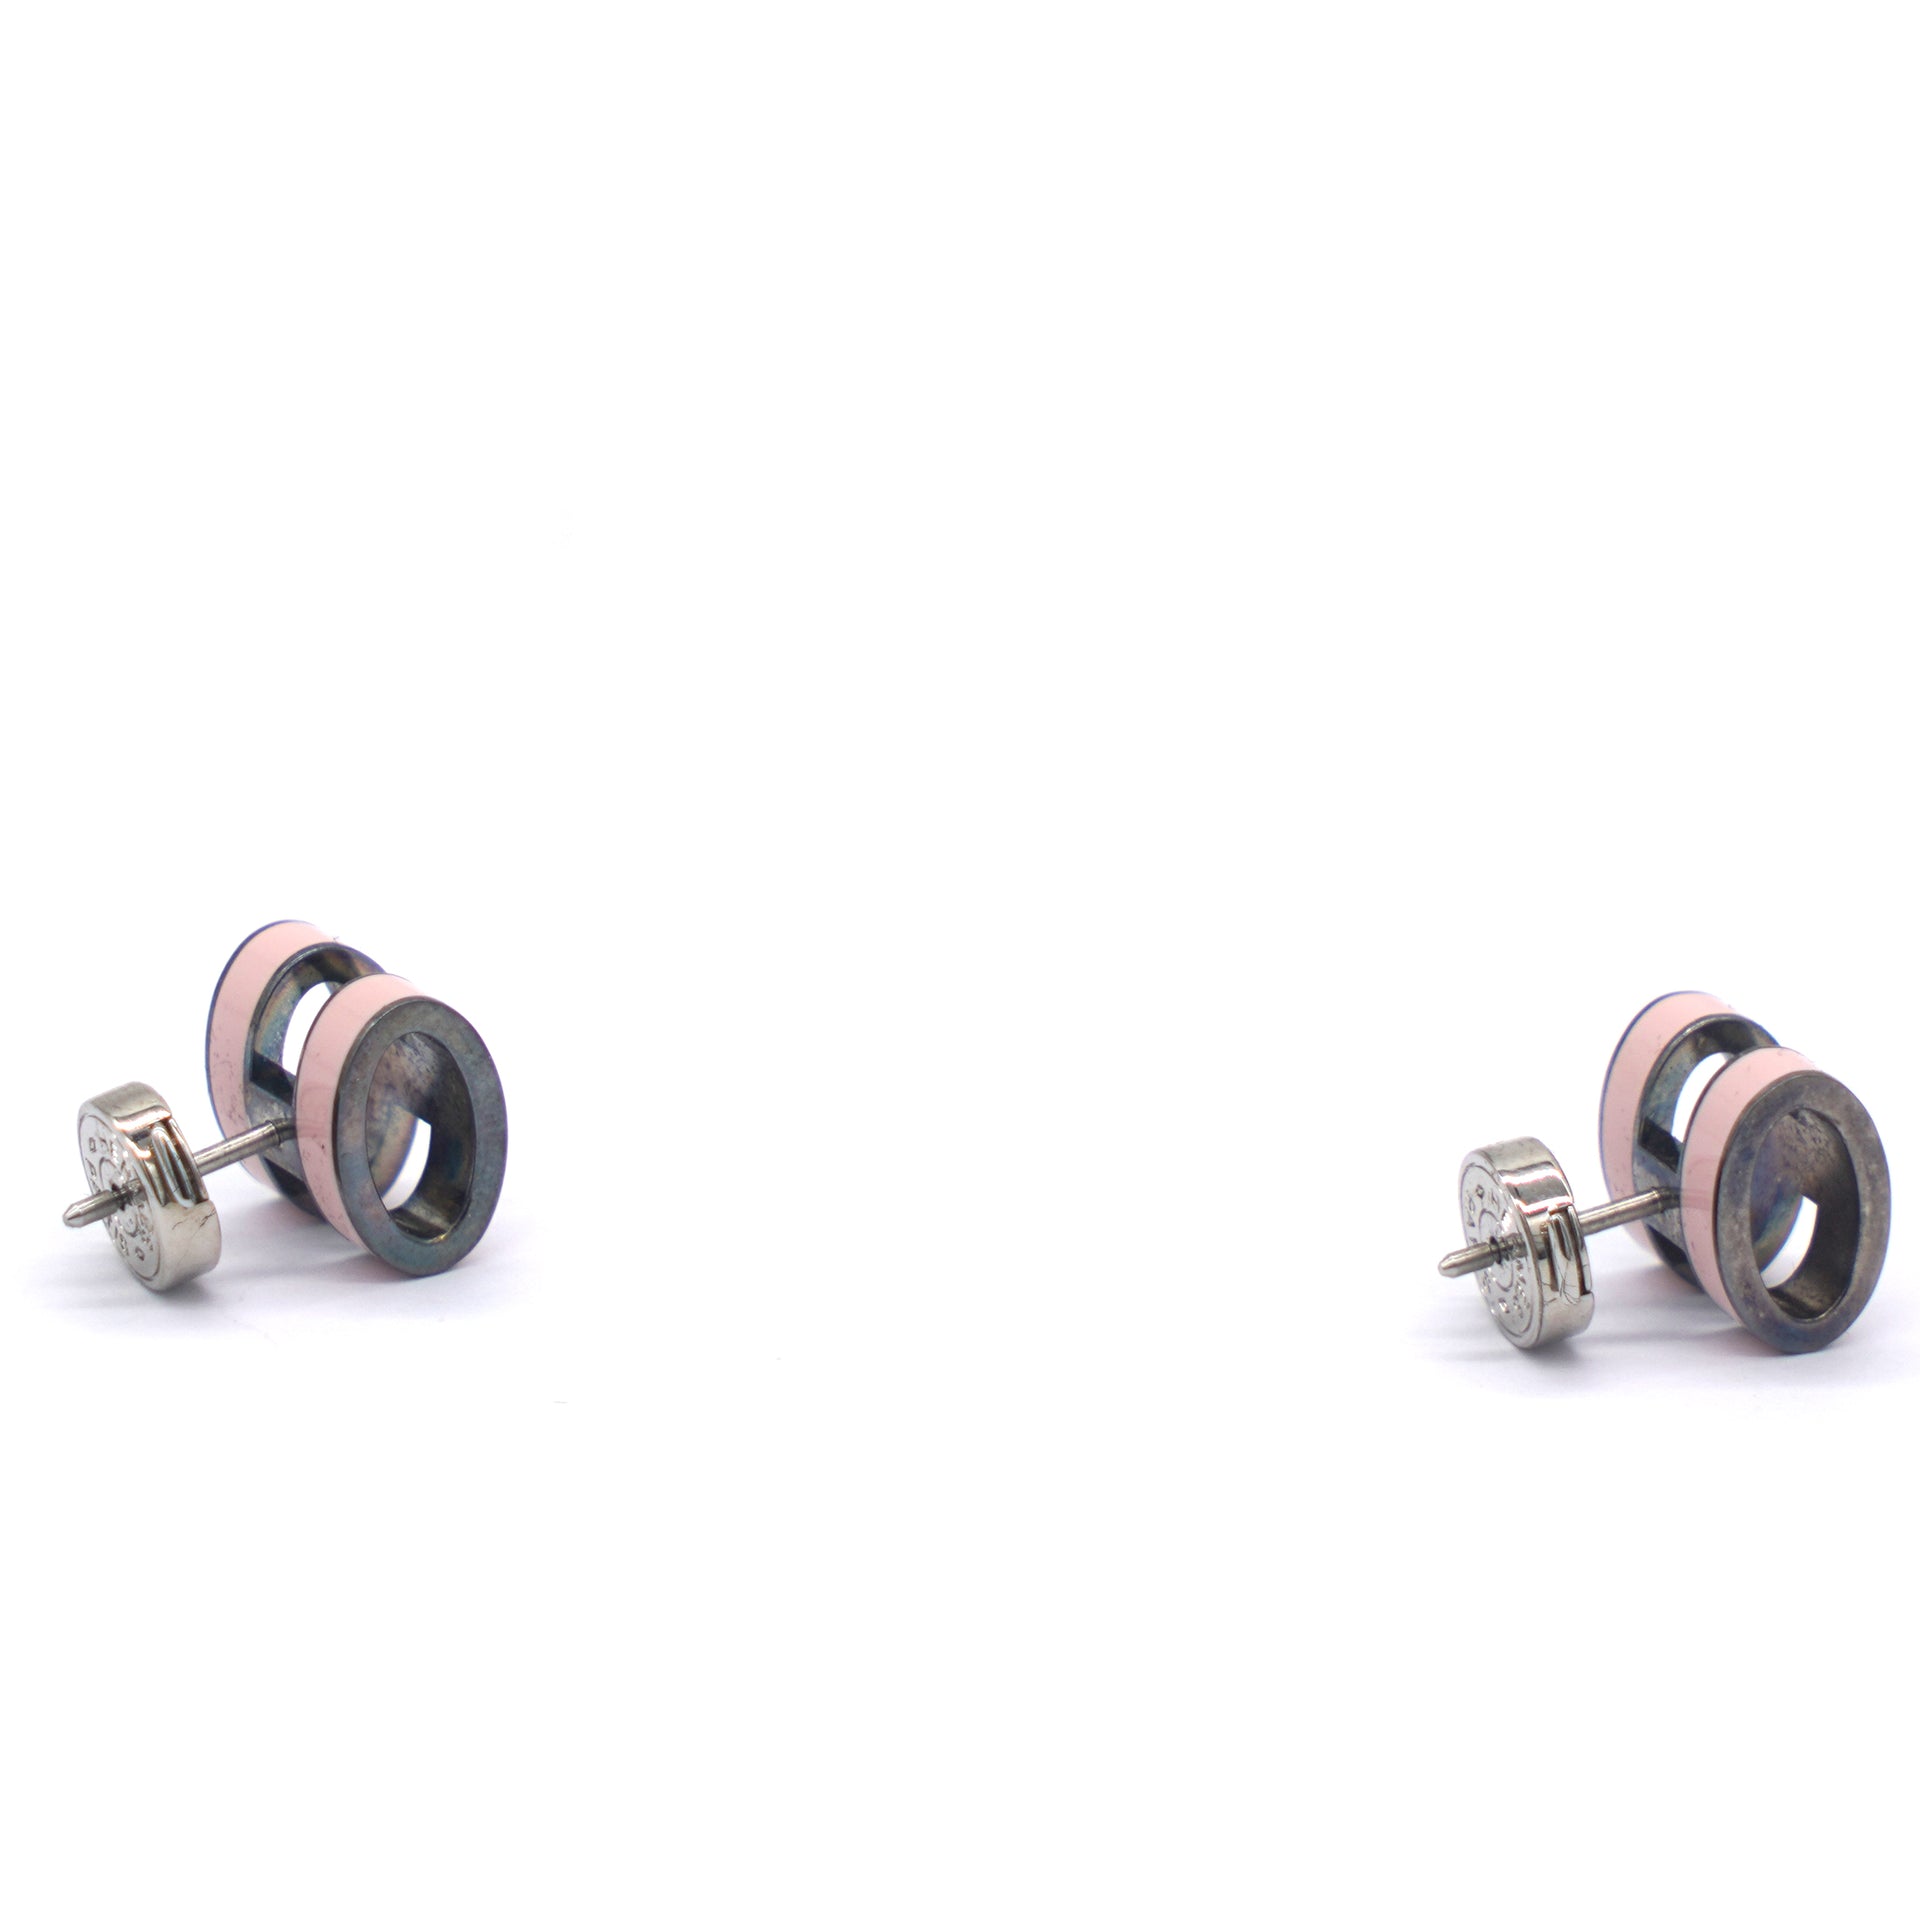 Lacquered Pop H Mini Earrings Pink